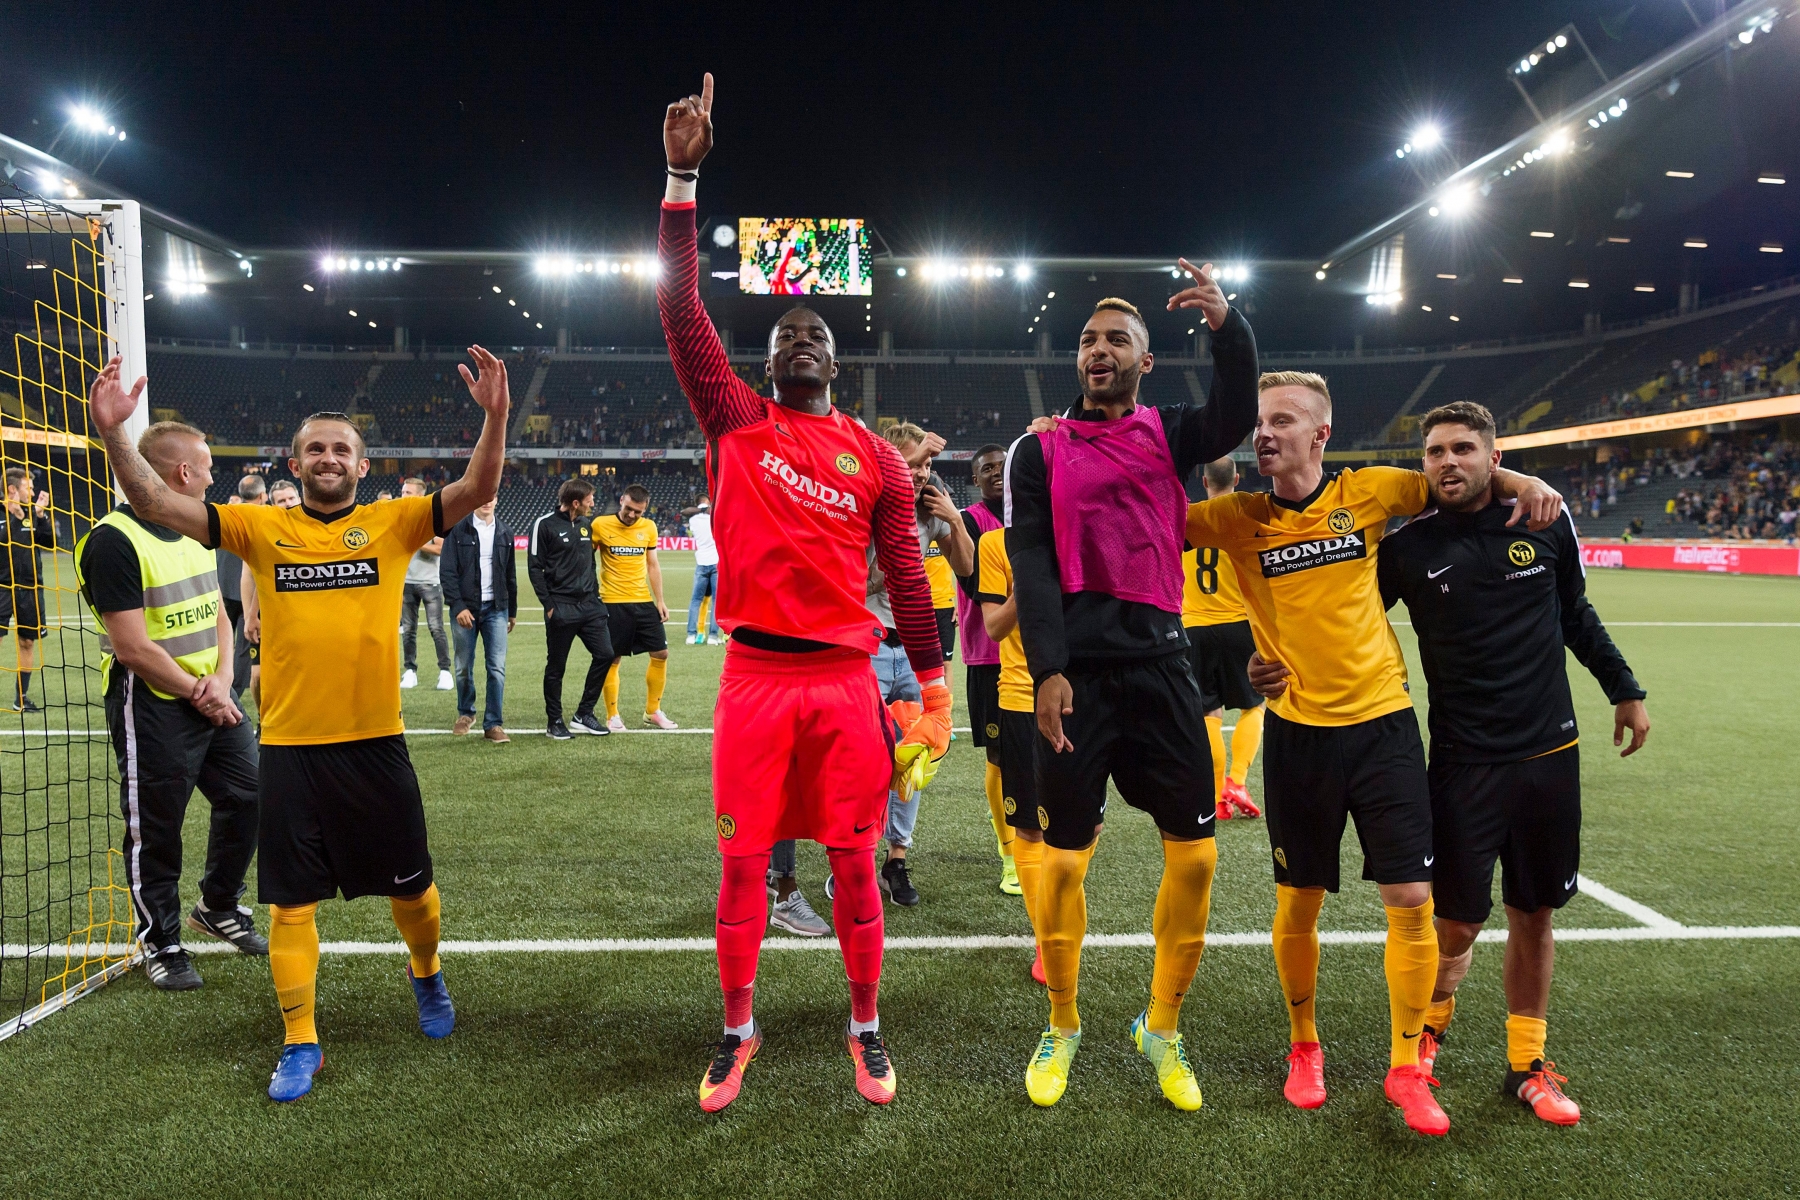 Young Boys' players cheers after winning the penalty shoot-out of the UEFA Champions League third qualifying round second leg match between SwitzerlandÕs BSC Young Boys and UkraineÕs FC Shakhtar Donetsk at the Stade de Suisse stadium in Bern, Switzerland, on Wednesday, August 3, 2016. (KEYSTONE/Georgios Kefalas) SWITZERLAND SOCCER UEFA CHAMPIONS LEAGUE YOUNG BOYS SHAKHTAR